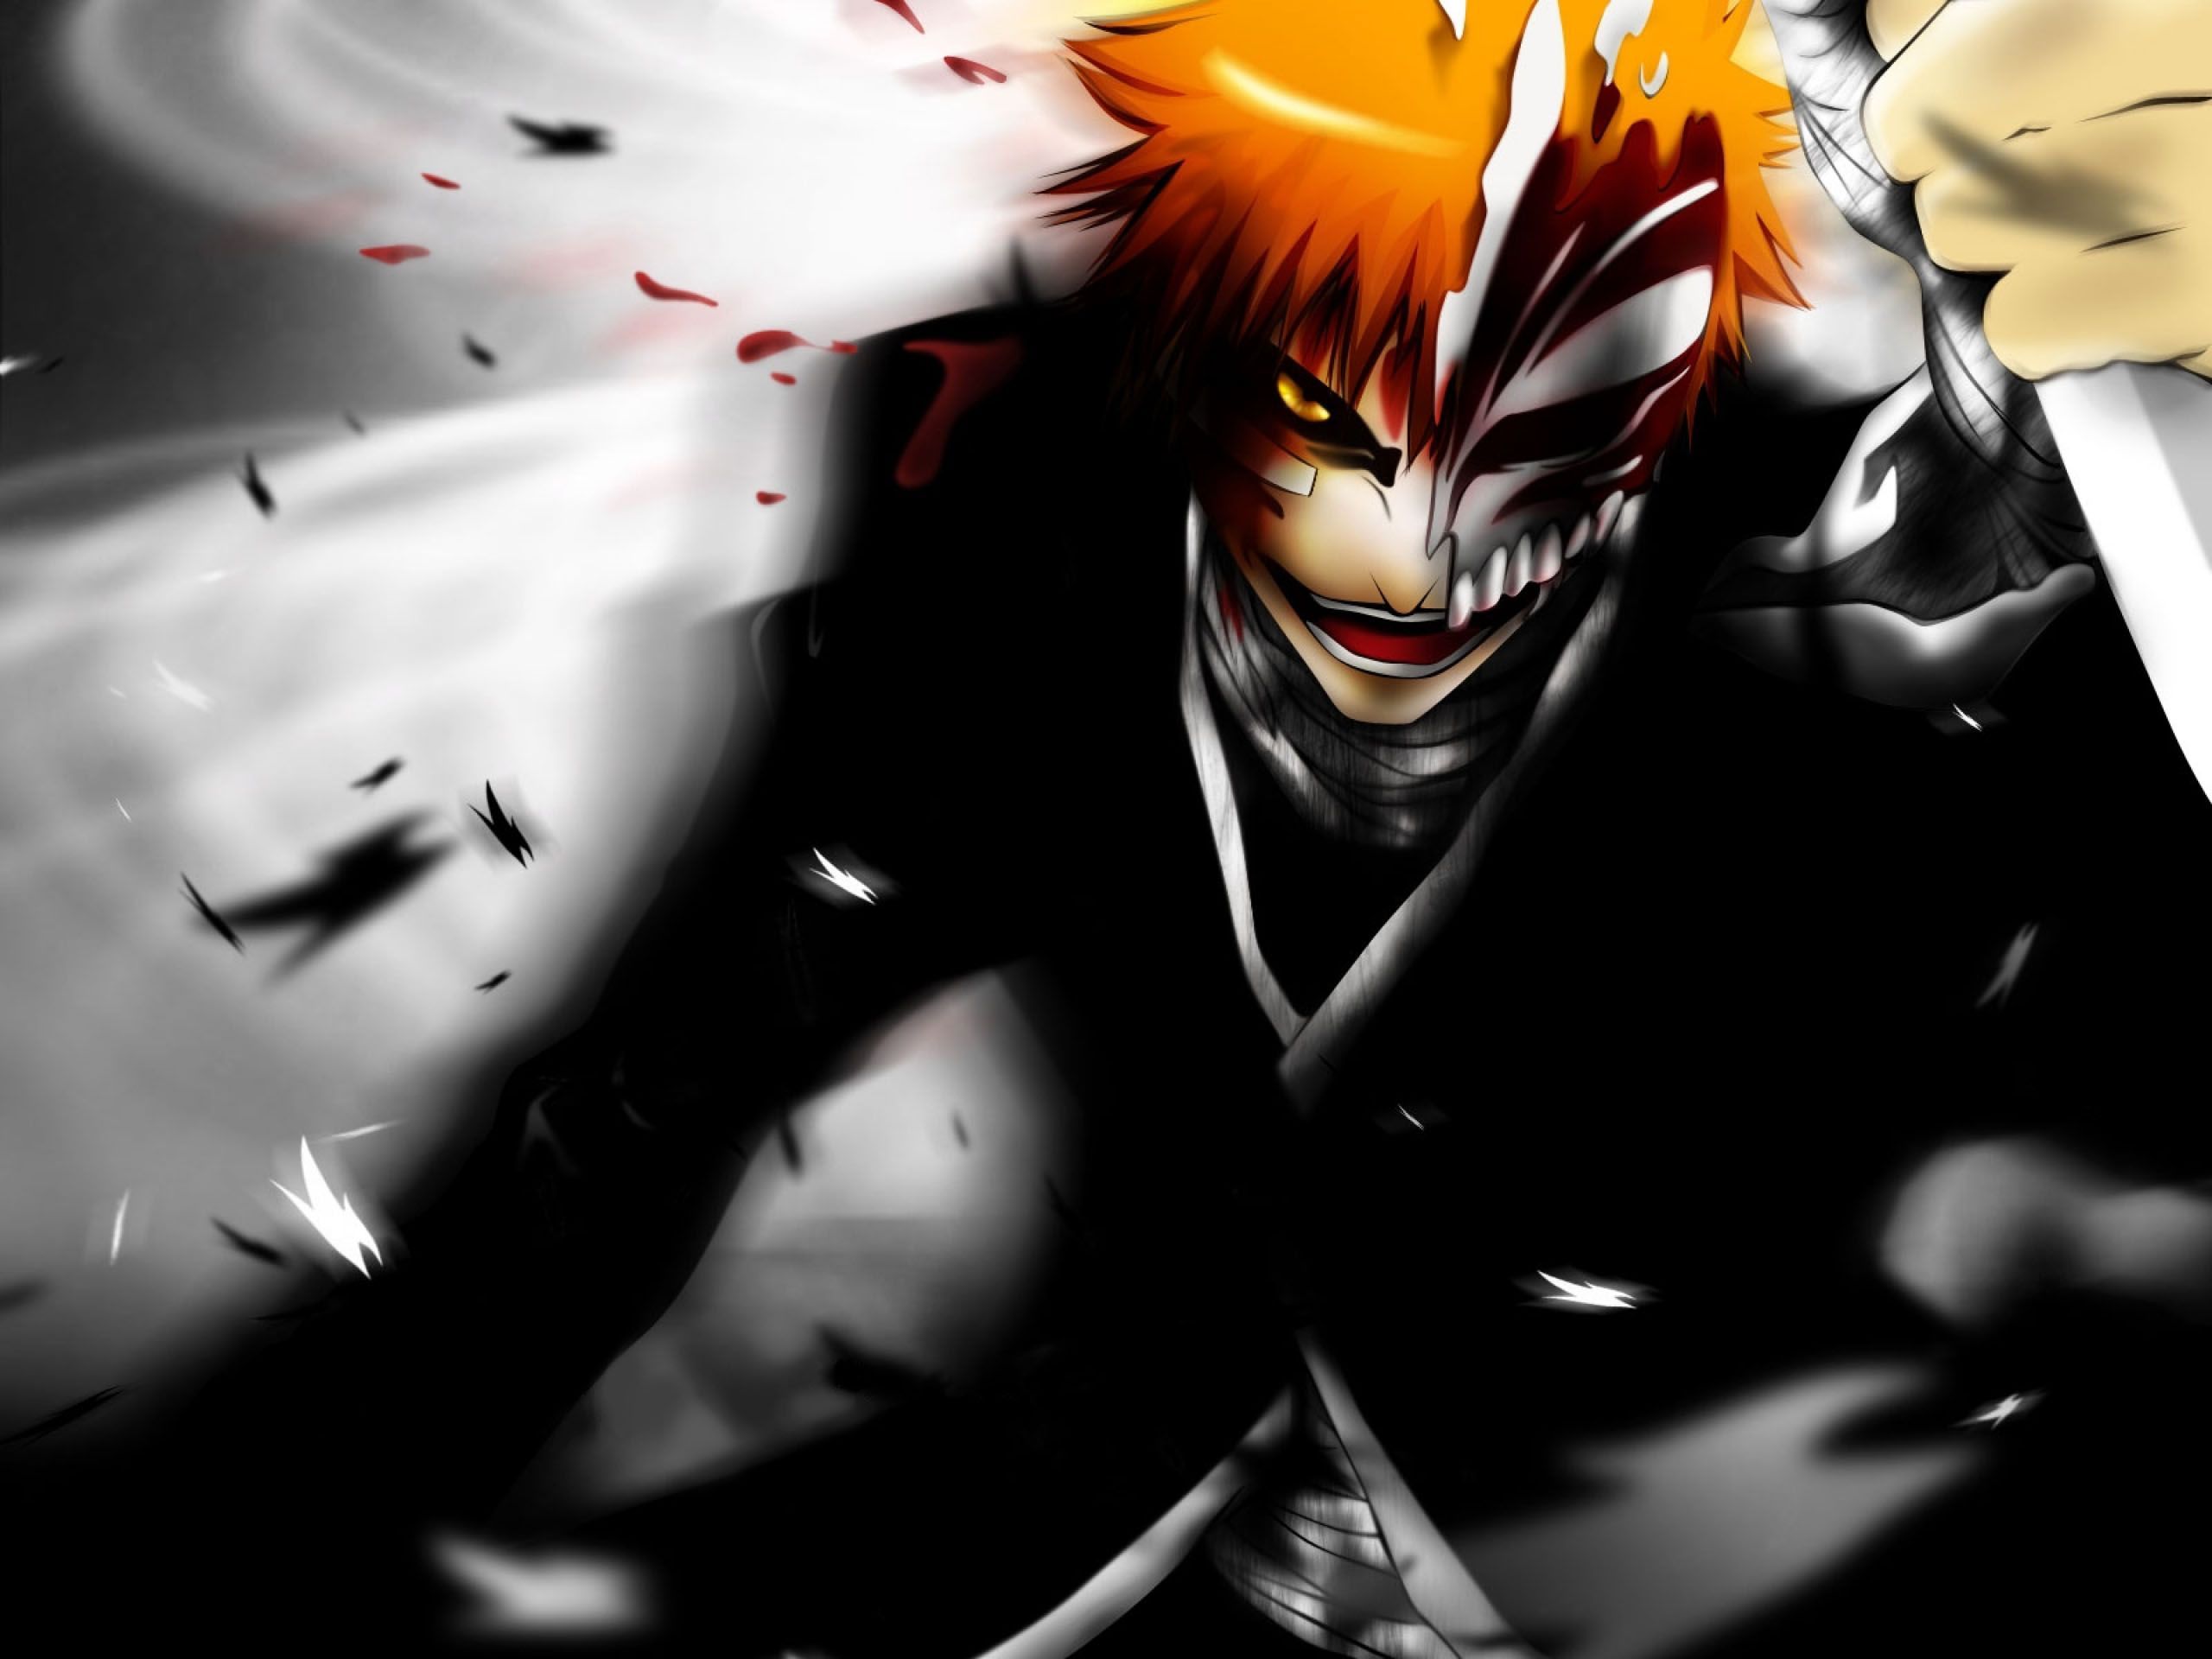 Ichigo with Hollow Mask in Action - 2560x1920 - Wallpaper